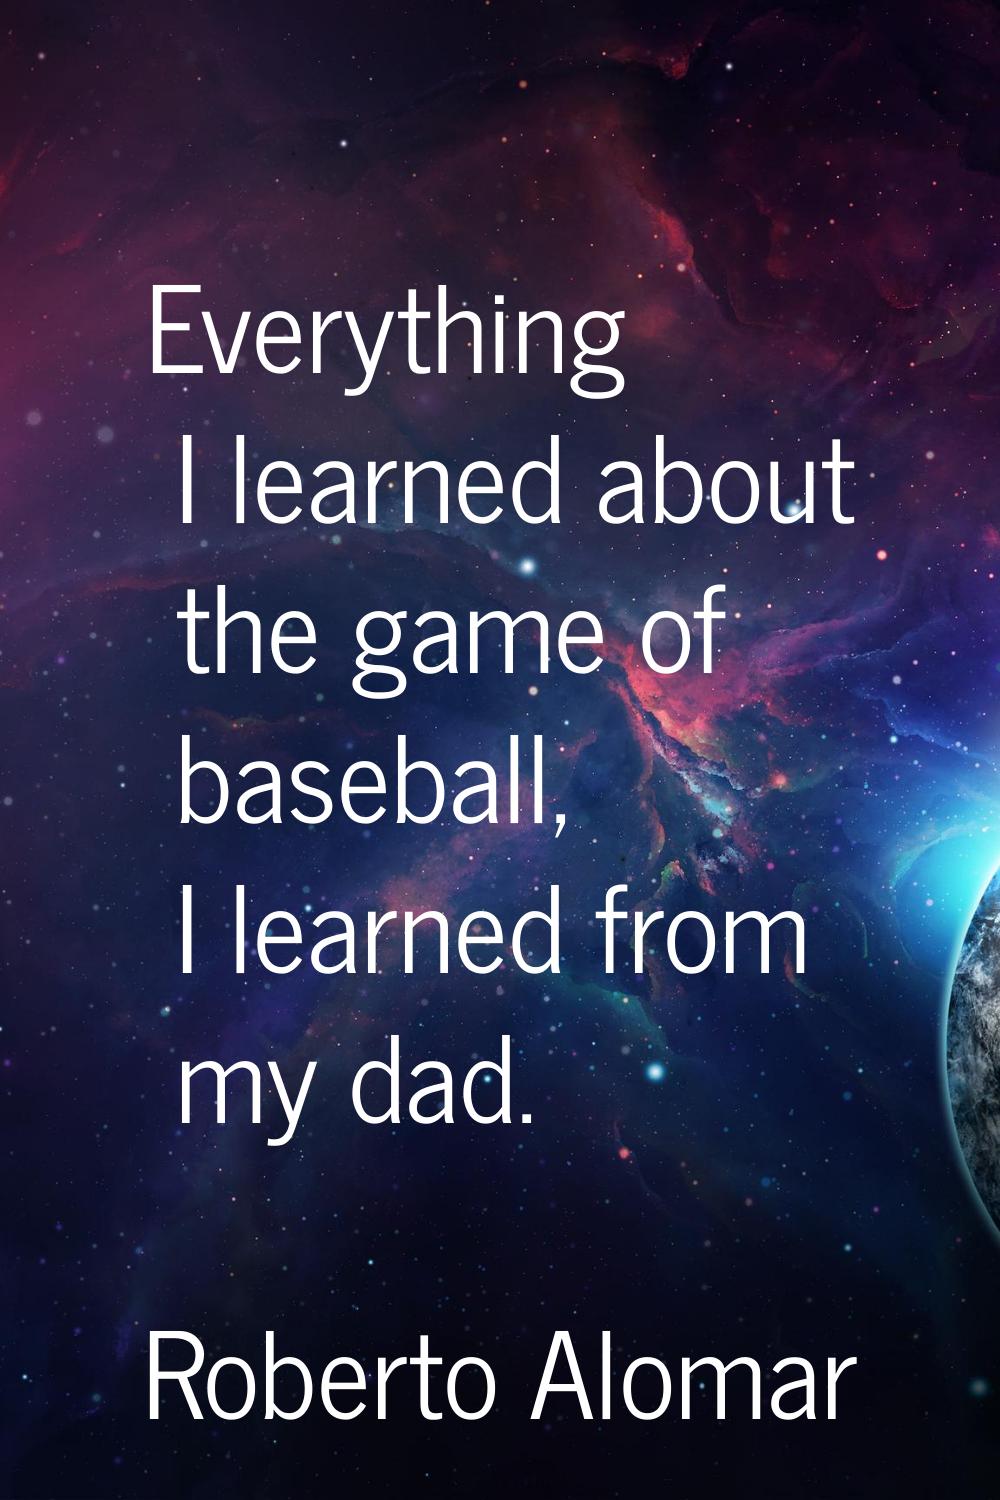 Everything I learned about the game of baseball, I learned from my dad.